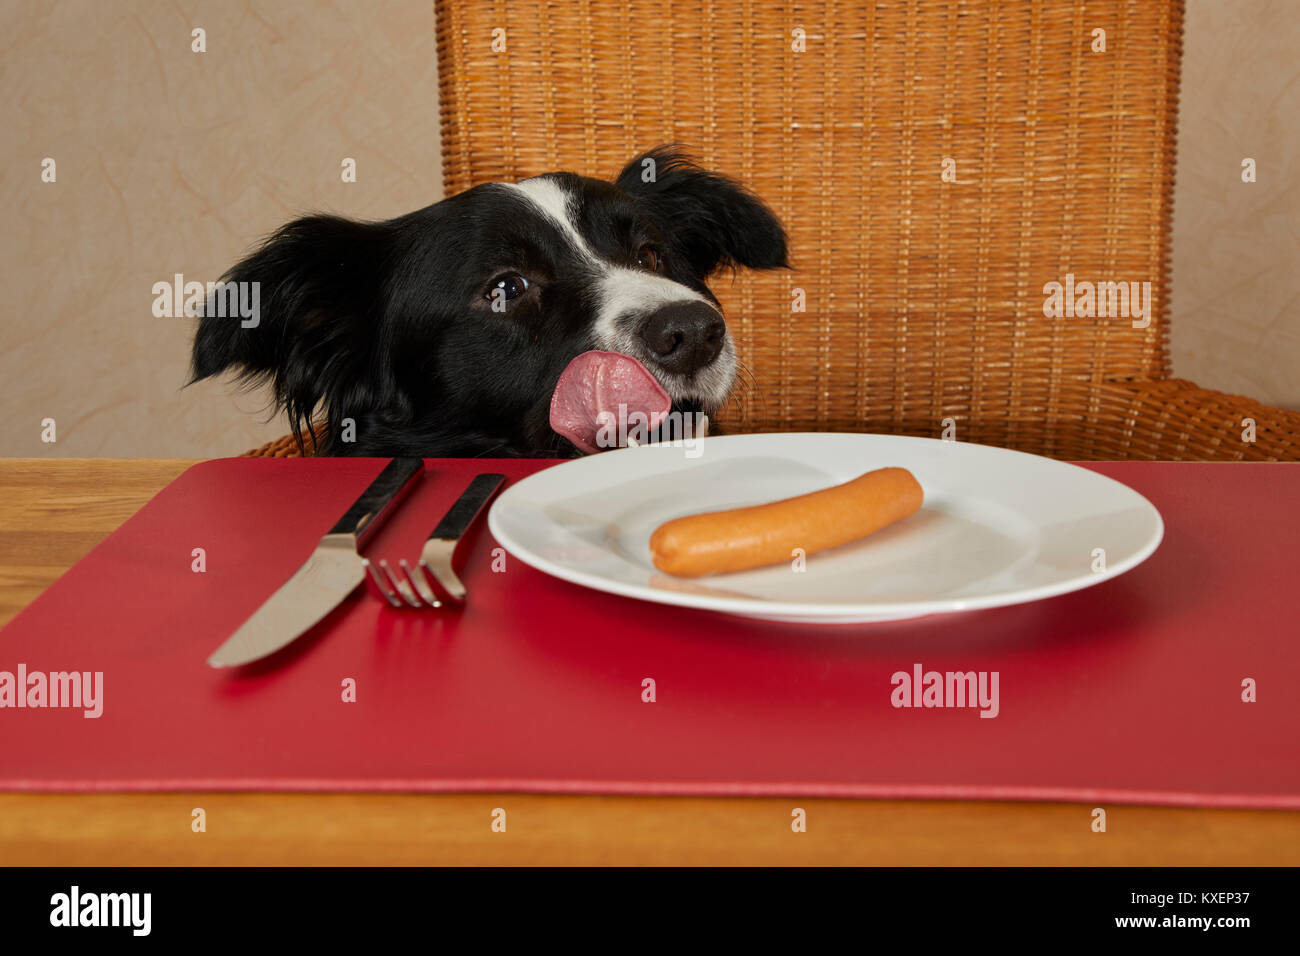 Border Collie looks at the table with sausages on the plate Stock Photo